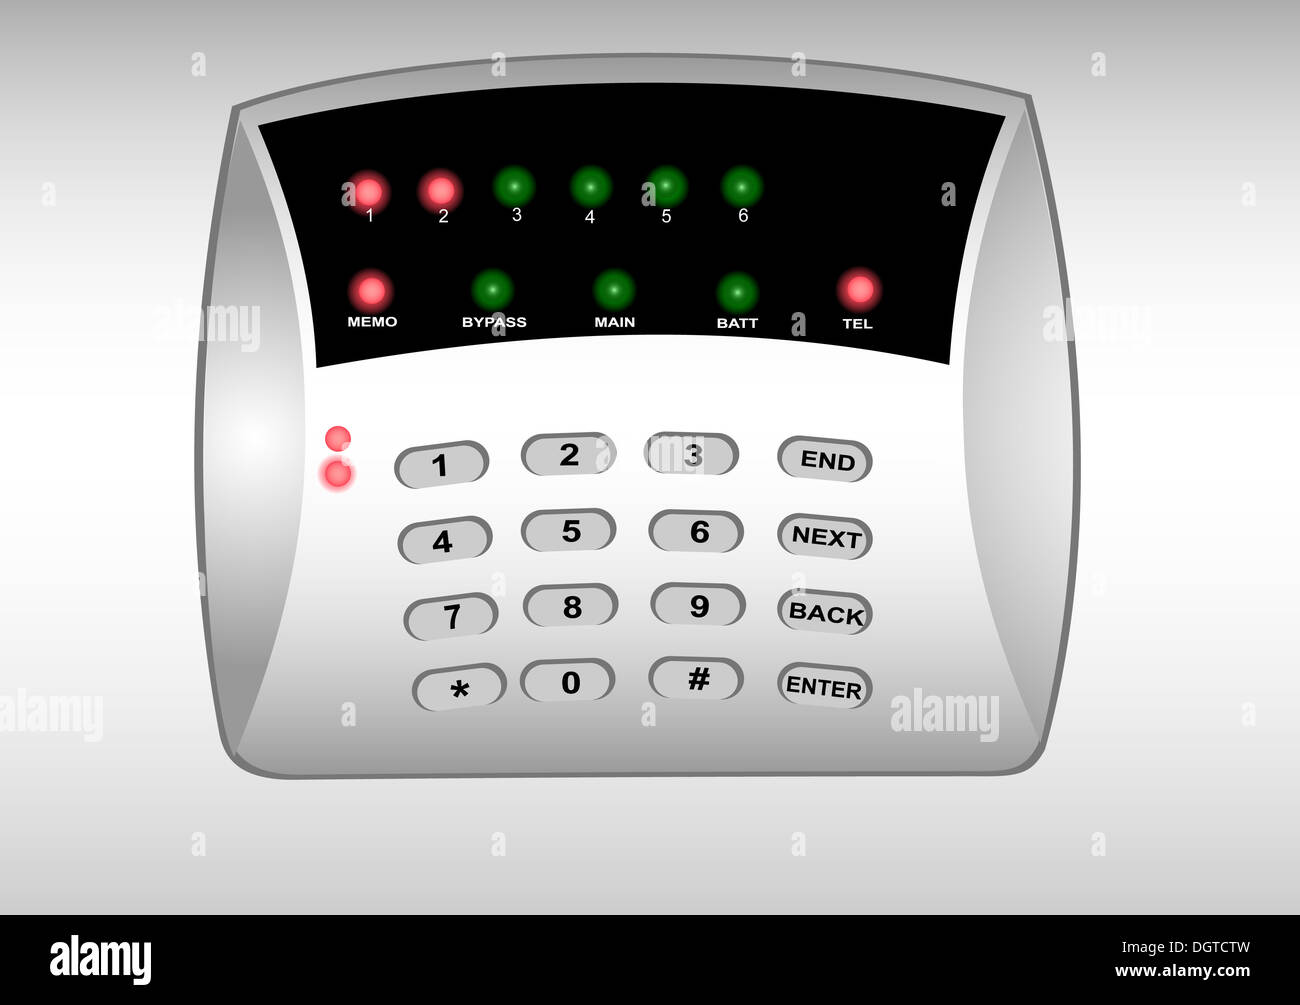 The panel of the security alarm system Stock Photo